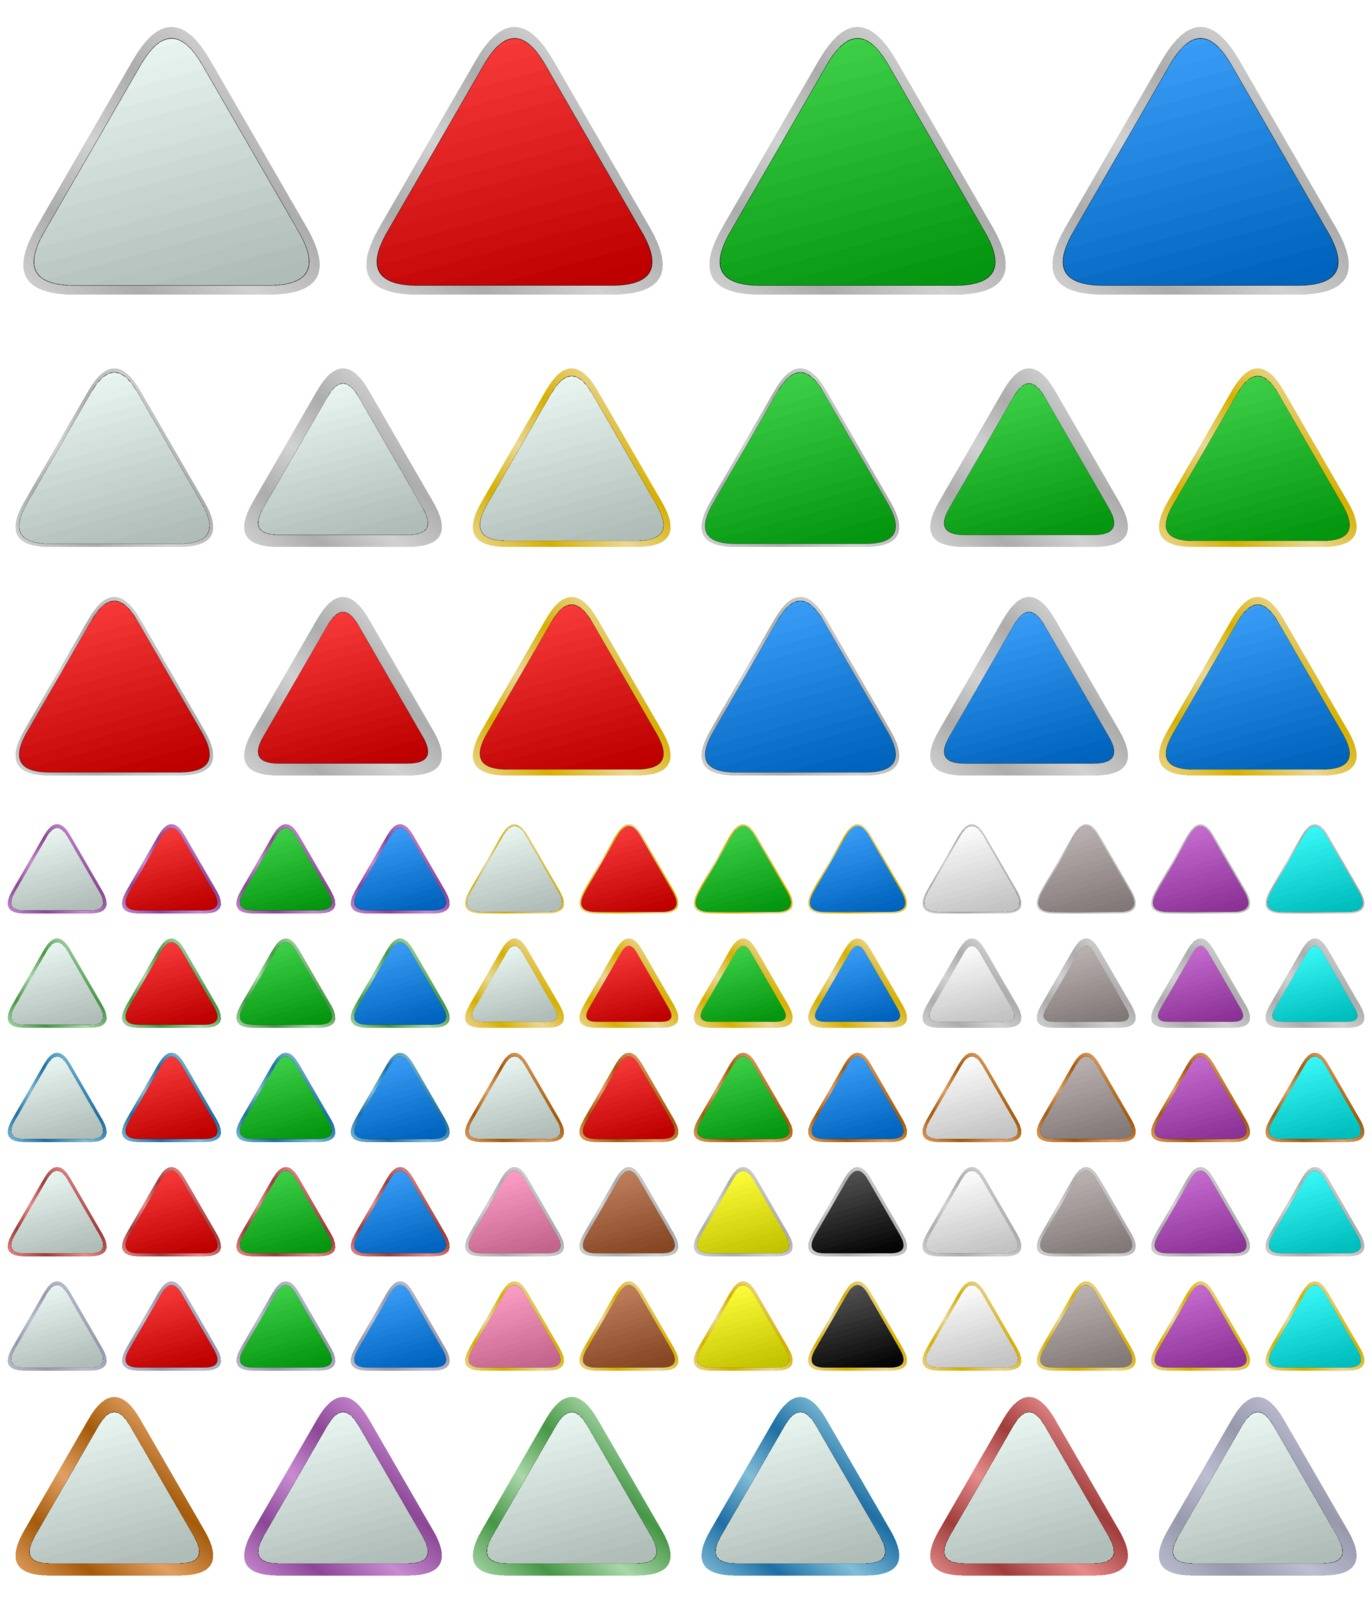 Color metallic rounded triangle shape button set